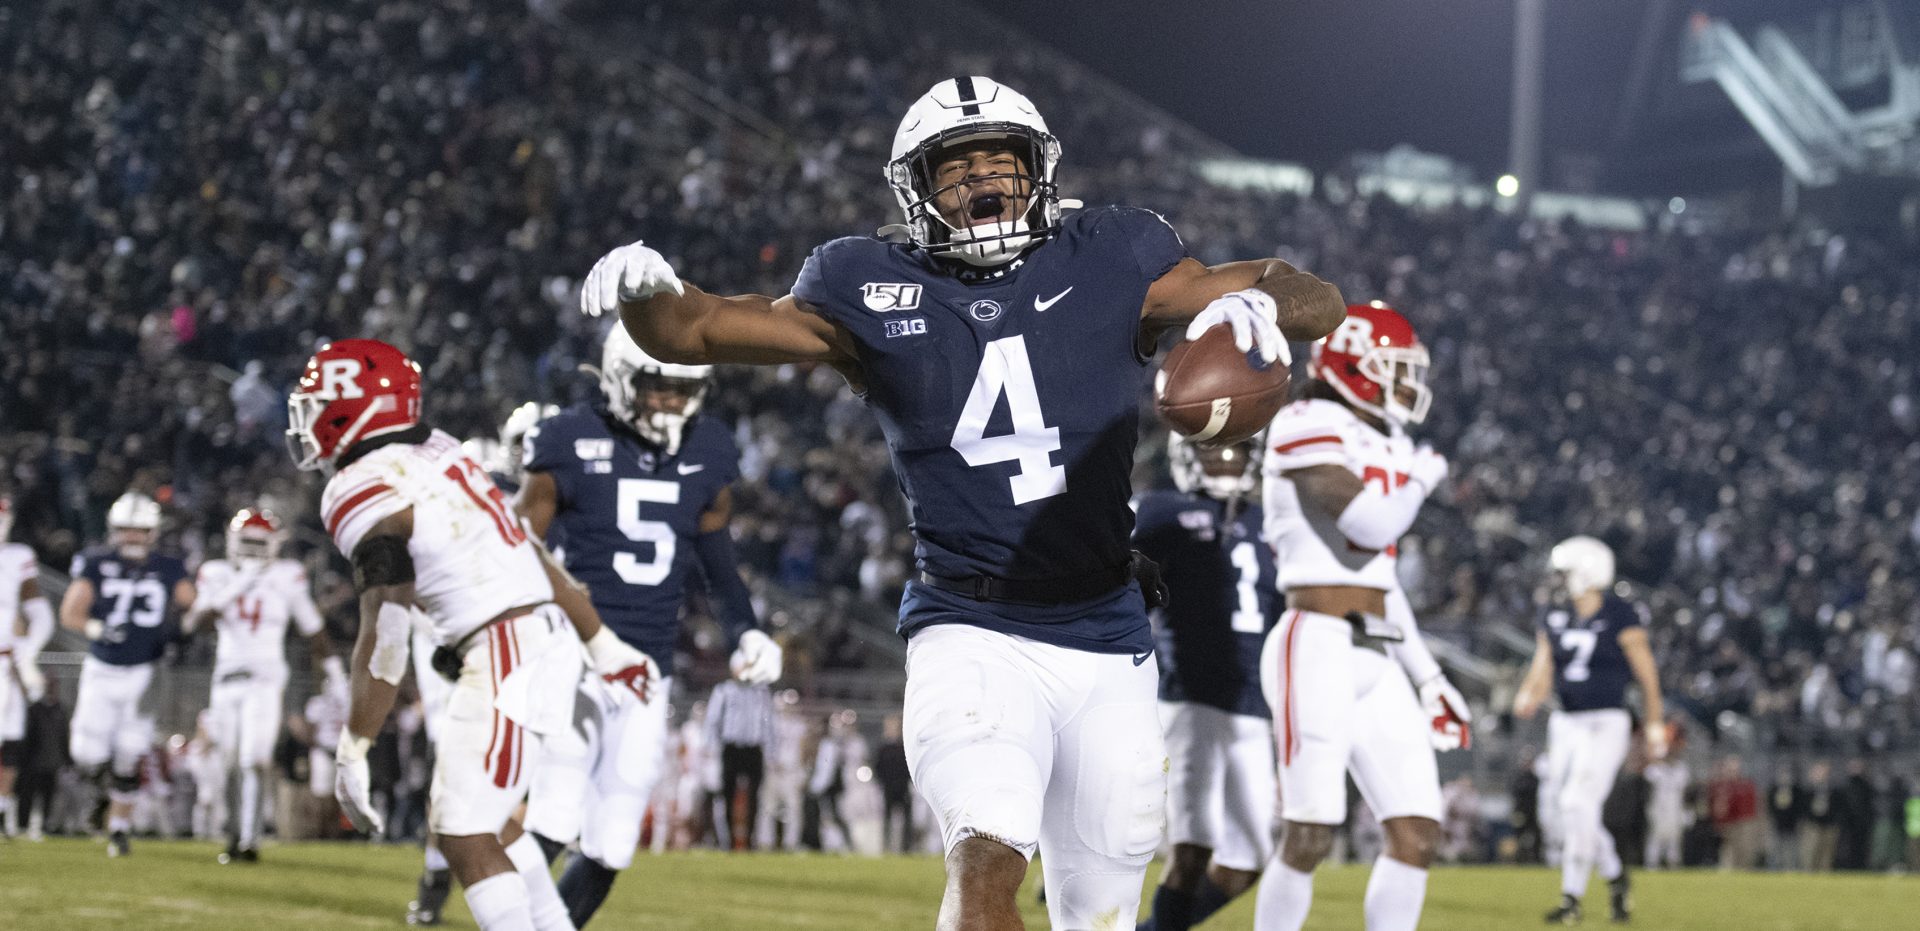 Penn State running back Journey Brown (4) celebrates his third quarter touchdown run against Rutgers during an NCAA college football game in State College, Pa., on Saturday, Nov. 30, 2019. Penn State defeated Rutgers 27-6. (AP Photo/Barry Reeger)